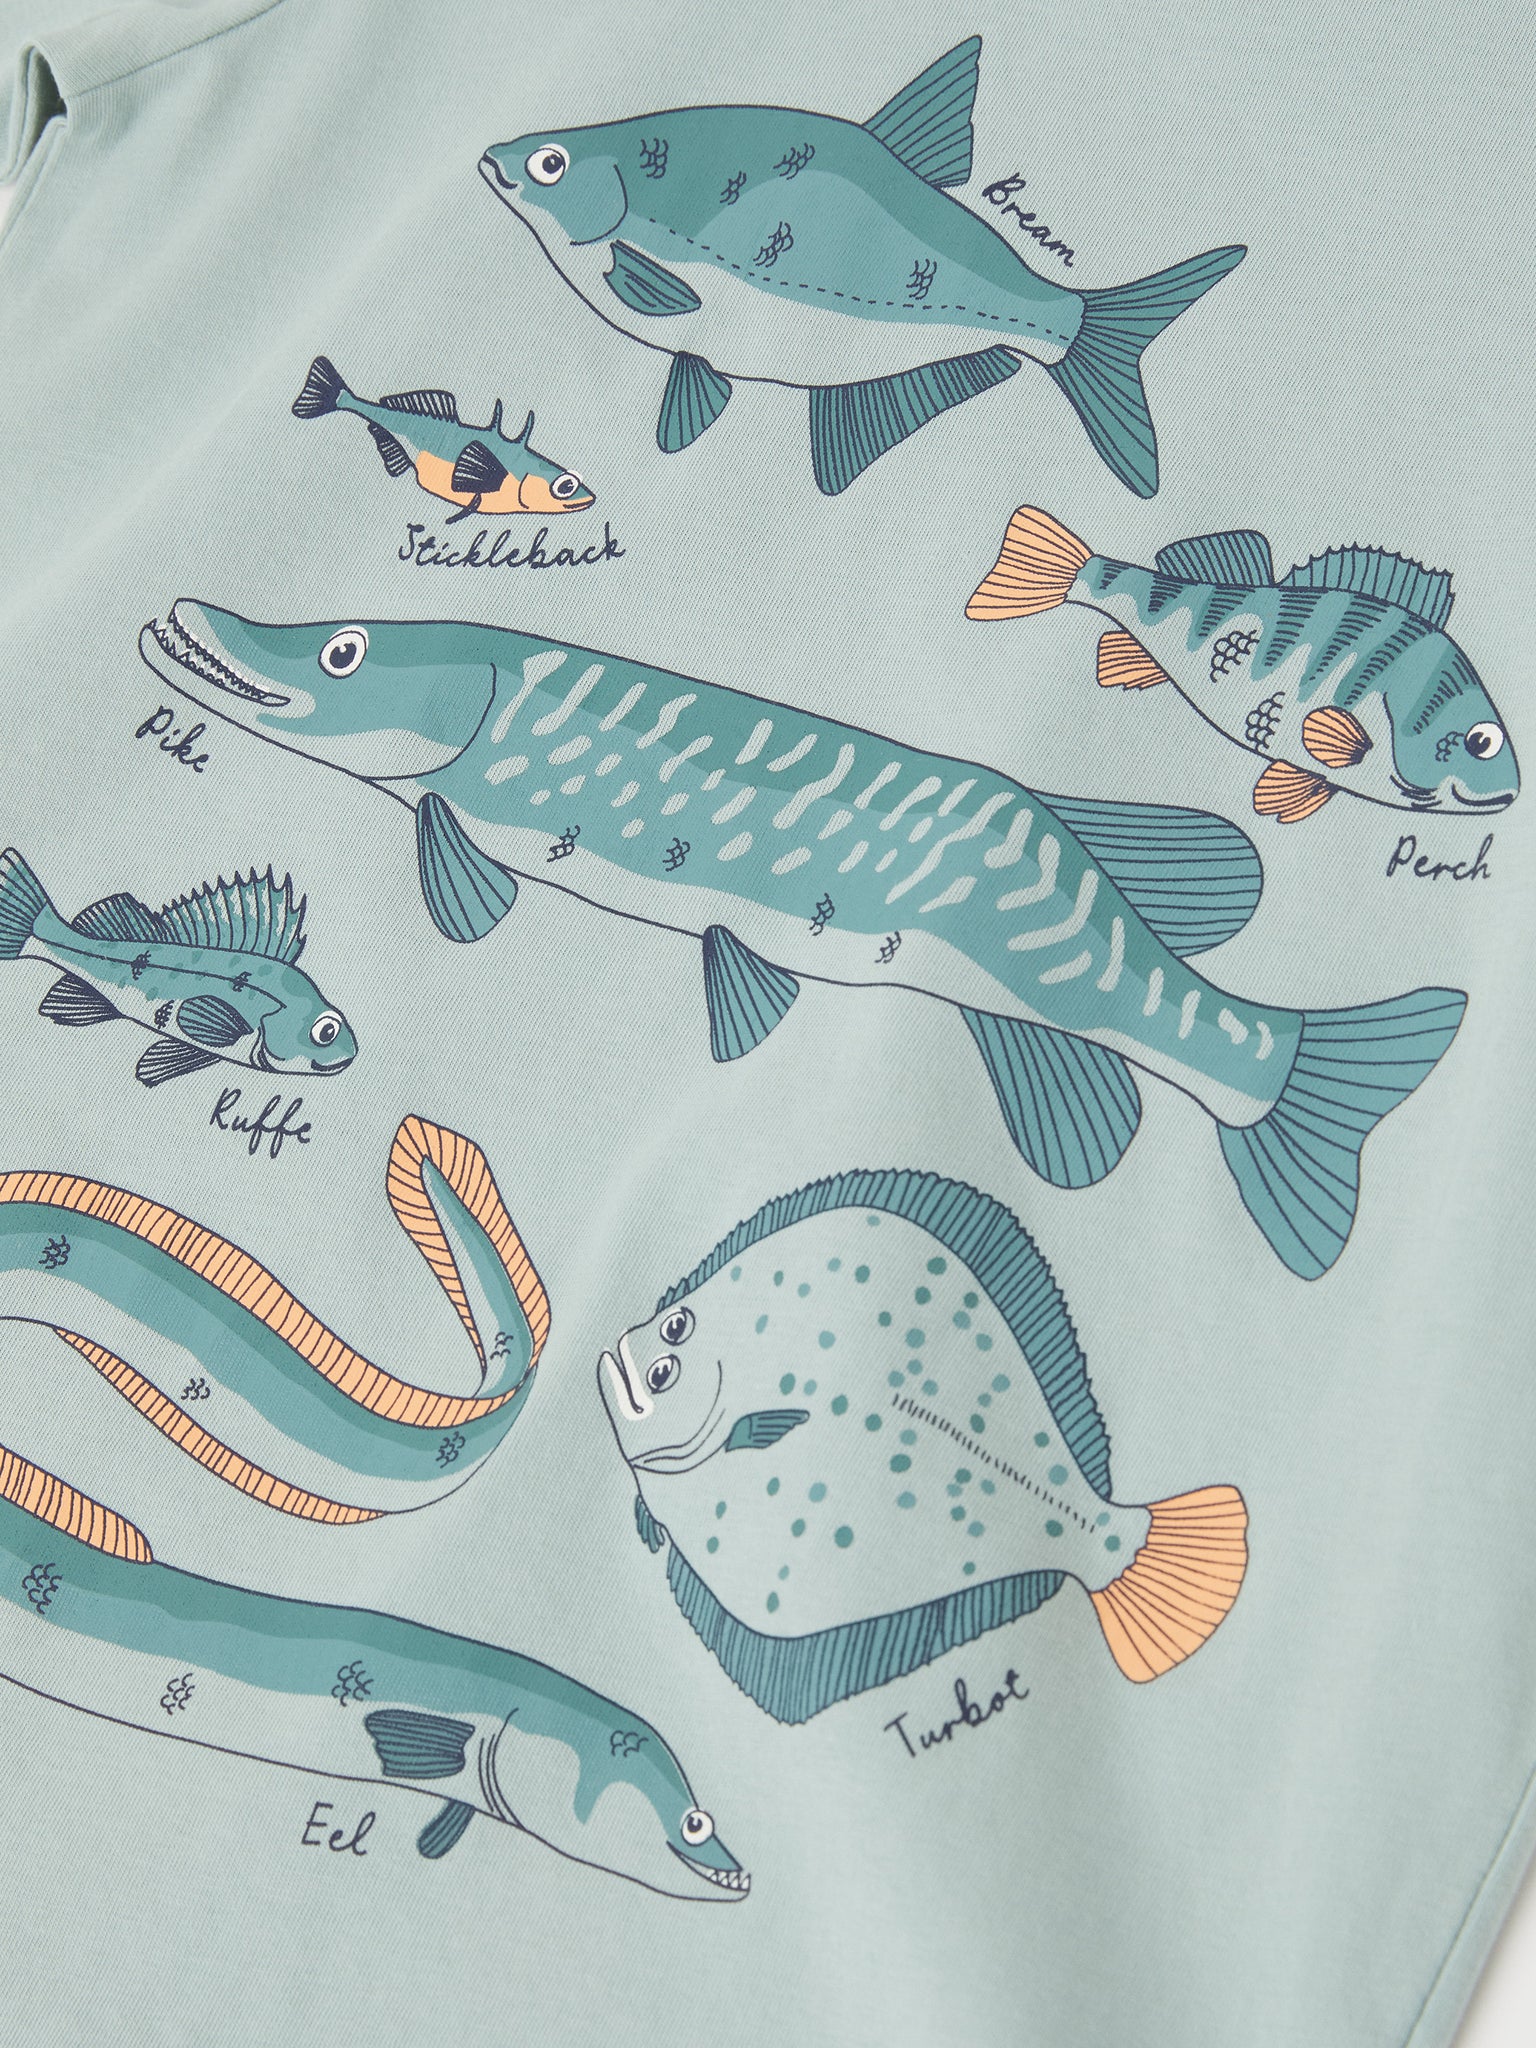 Cotton Kids Sea Life Print T-Shirt from the Polarn O. Pyret kidswear collection. Ethically produced kids clothing.